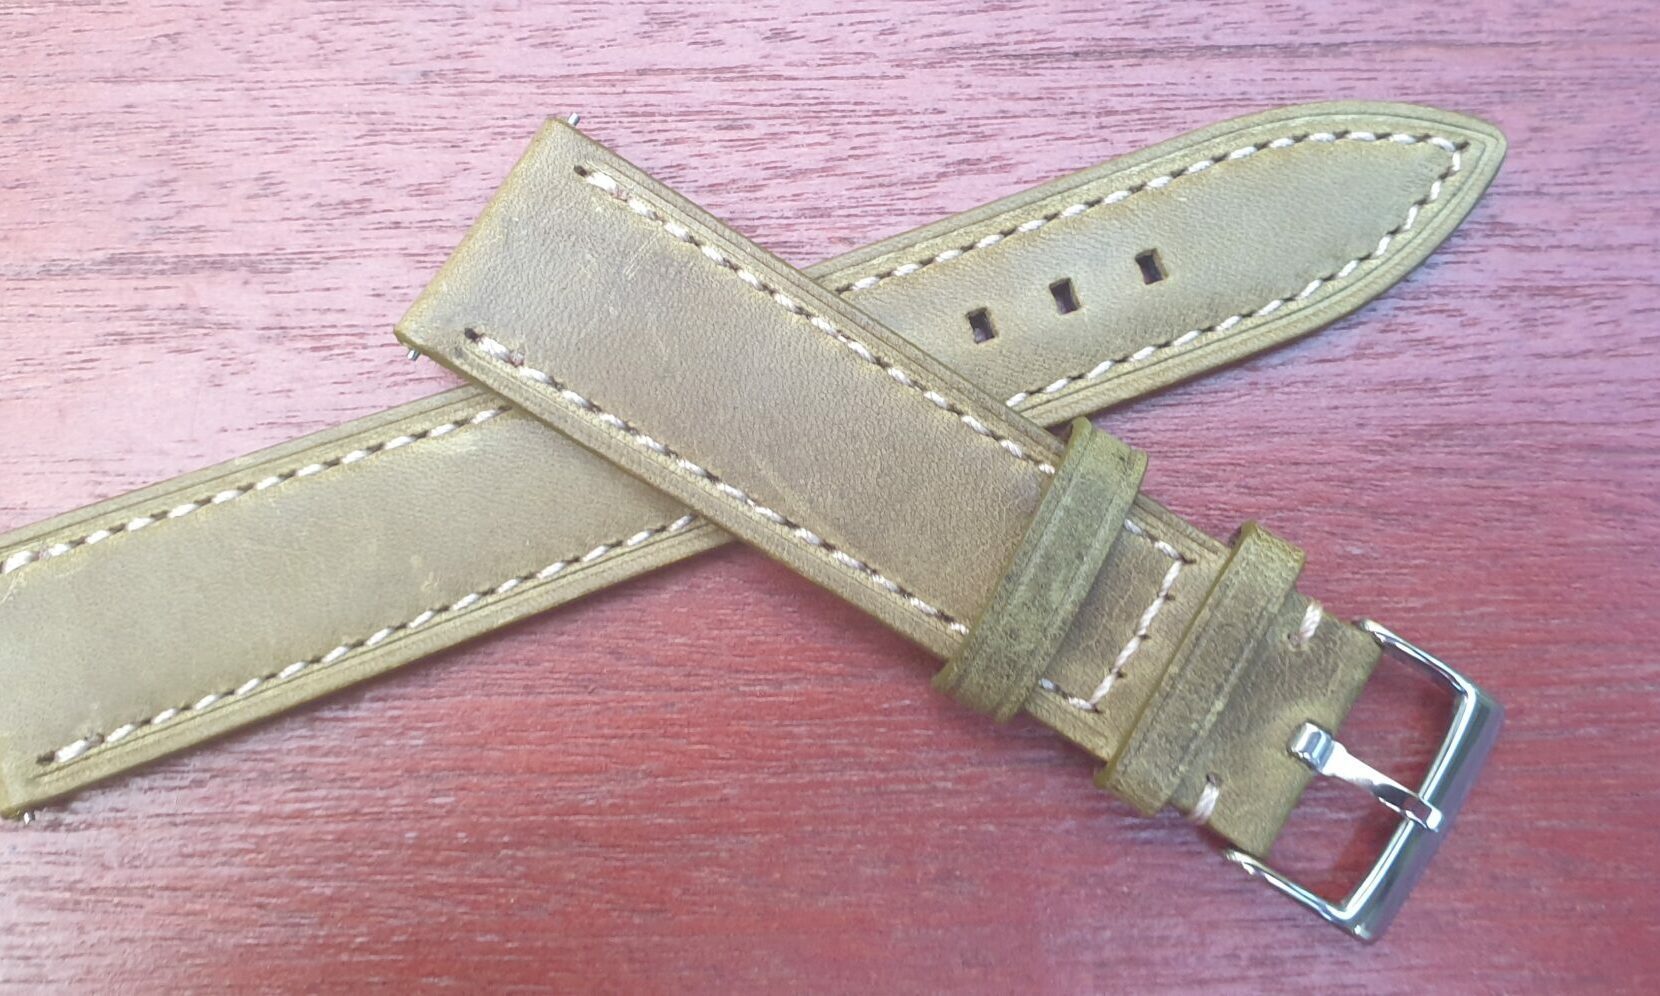 green leather strap